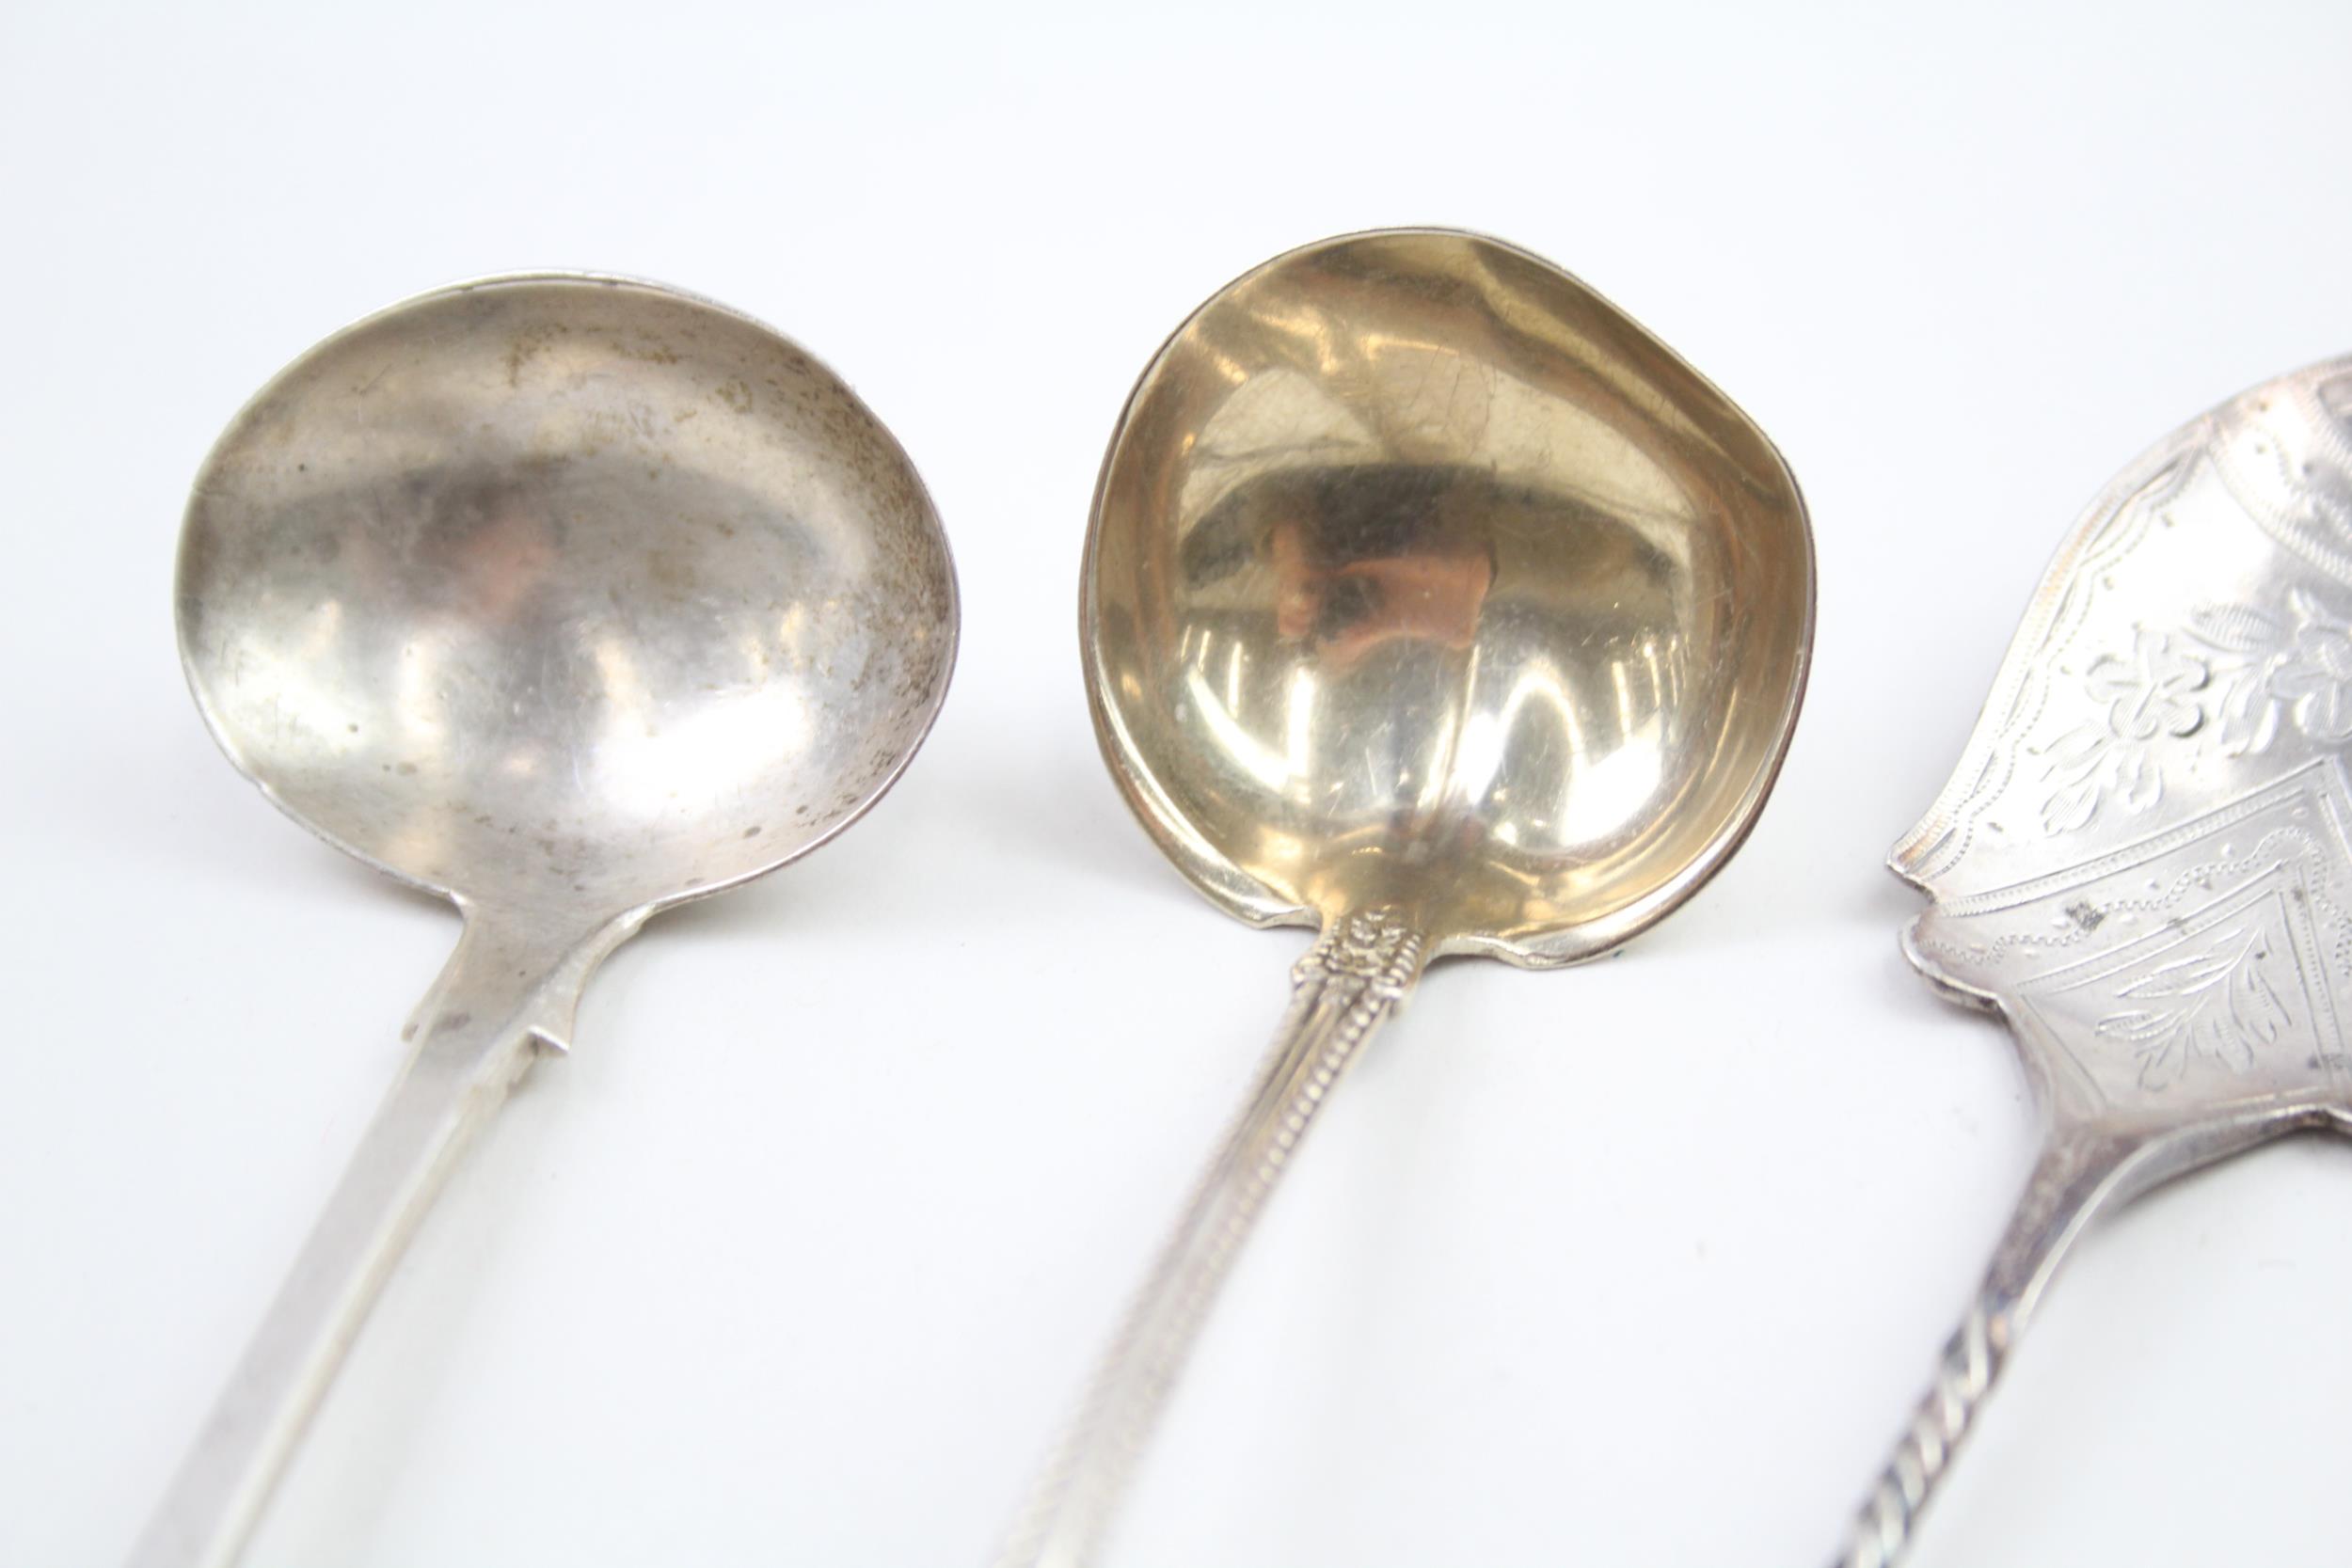 9 x Antique Vintage HM .925 Sterling Silver Spoons Inc Bottom Marked Etc (100g) - In antique / - Image 2 of 7